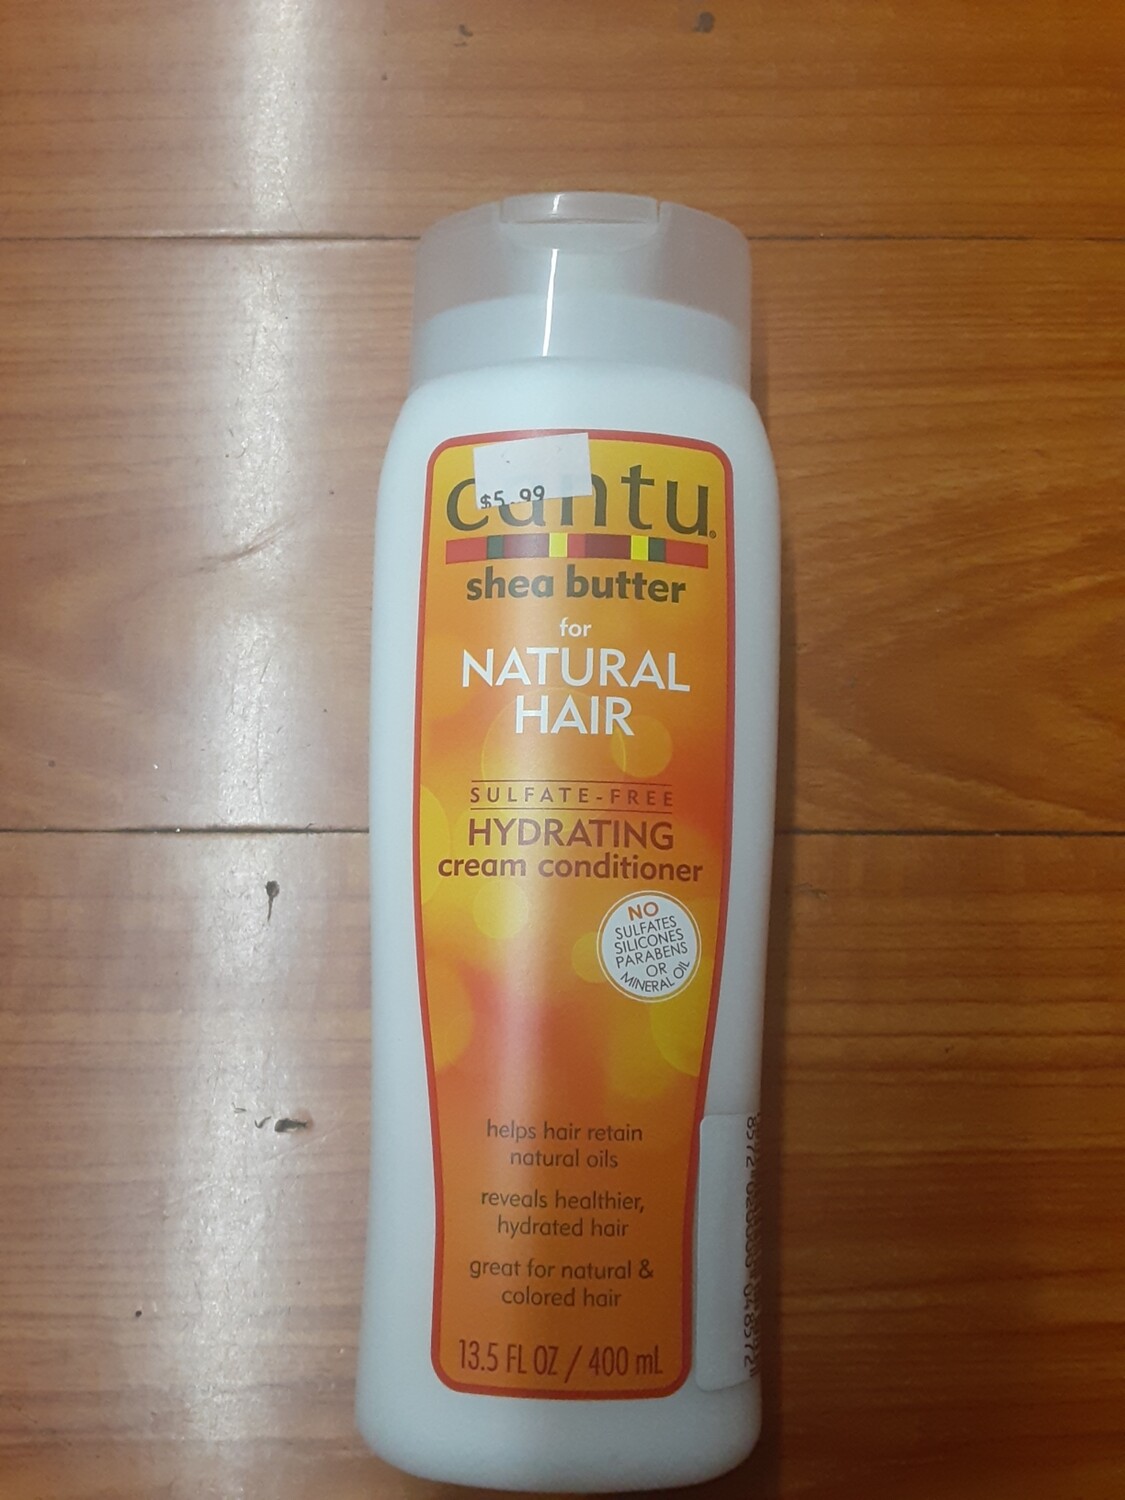 Cantu Shea Butter for natural hair hydrating cream conditioner 13.5 fluid ounce